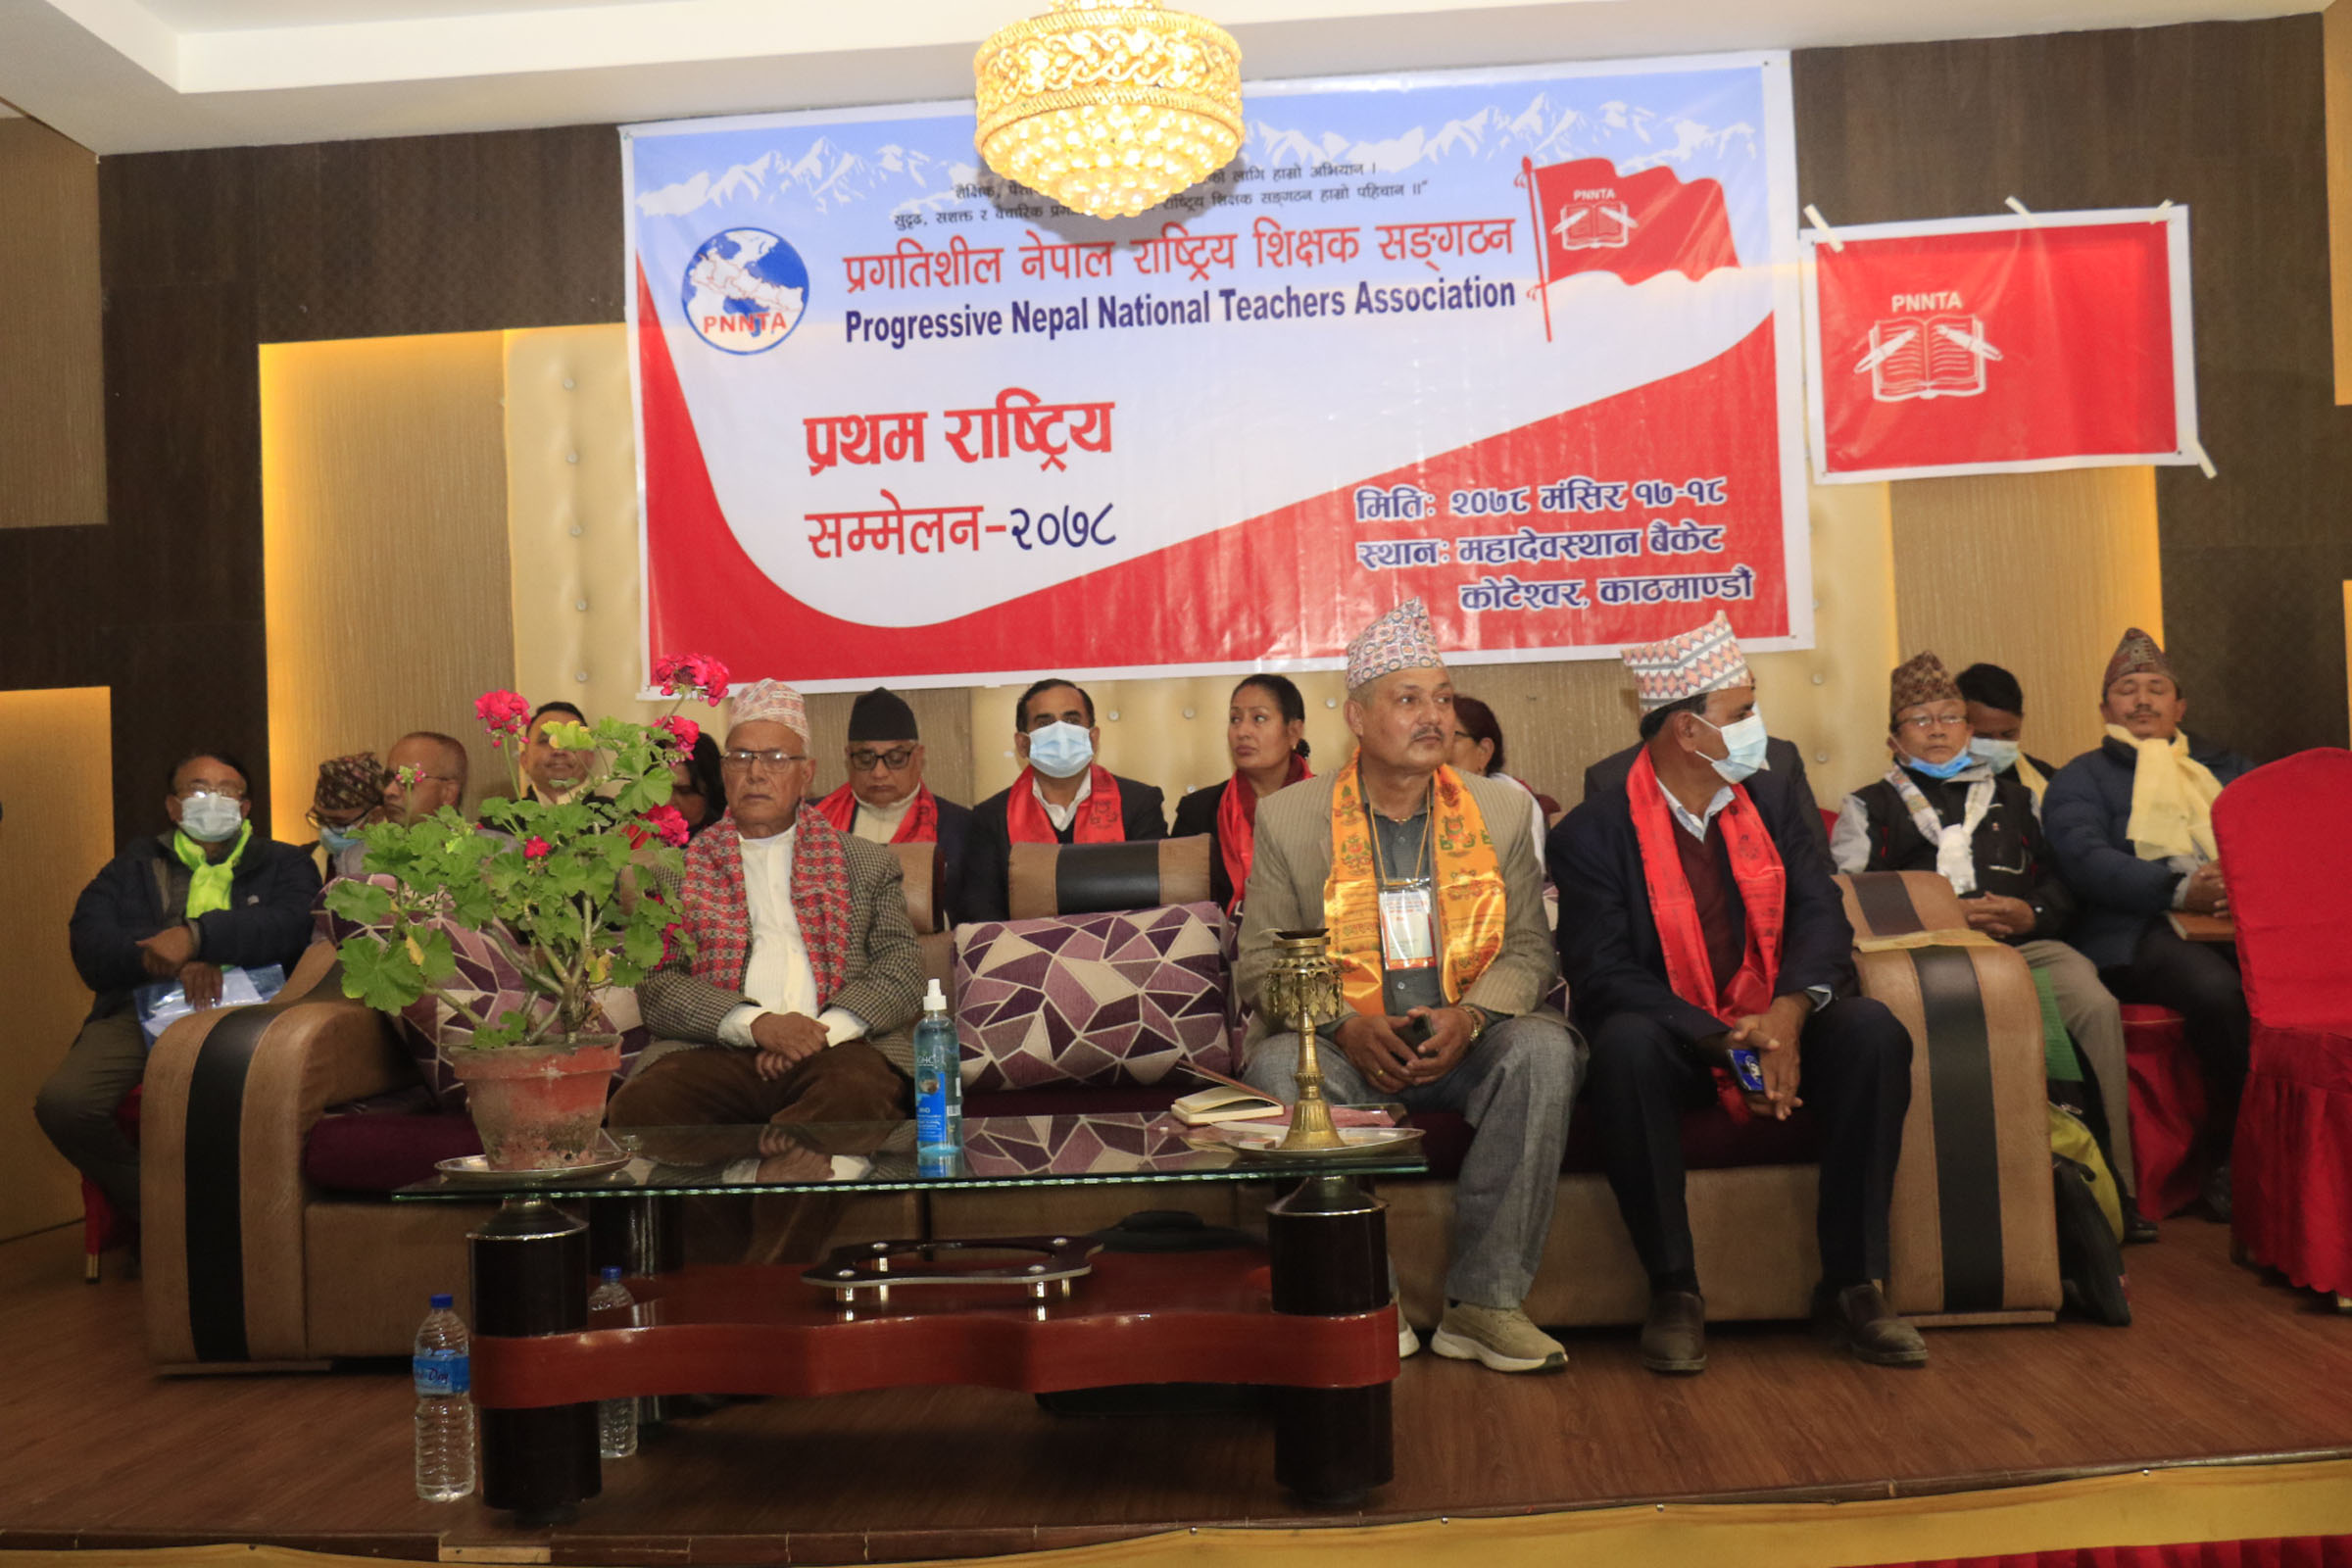 Unified Socialist Chair Nepal against commercialization of education, health sectors